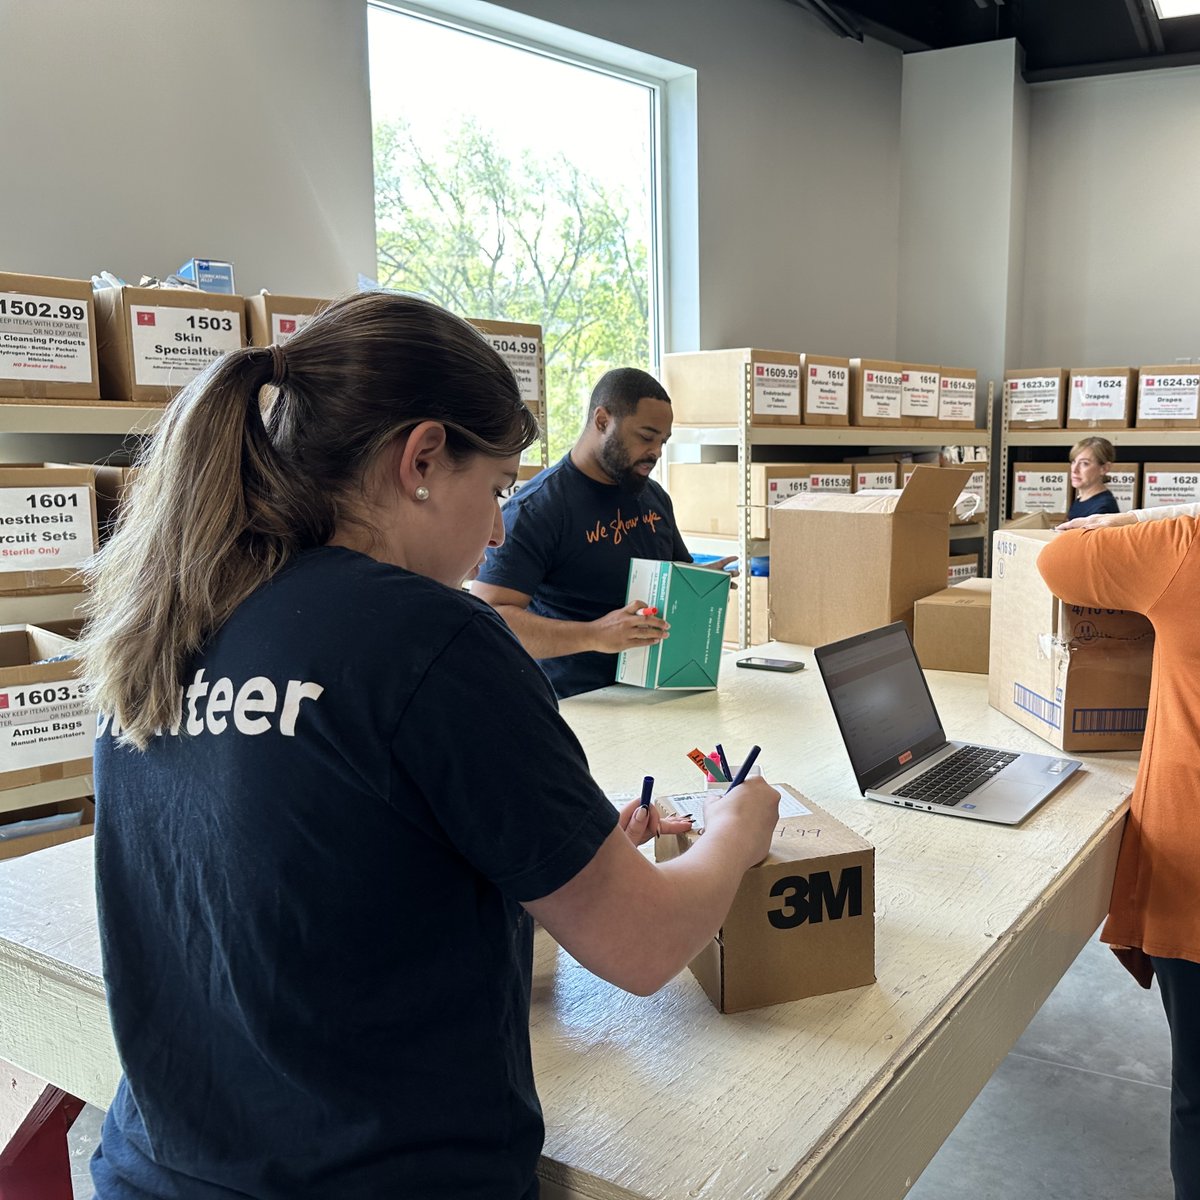 As part of HCA Healthcare's annual month-long community #volunteer campaign, Community Days: A Month of Service, colleagues volunteered with @projectcure to sort and pack medical supplies for resource-limited communities across the globe: bit.ly/3W4OUxn